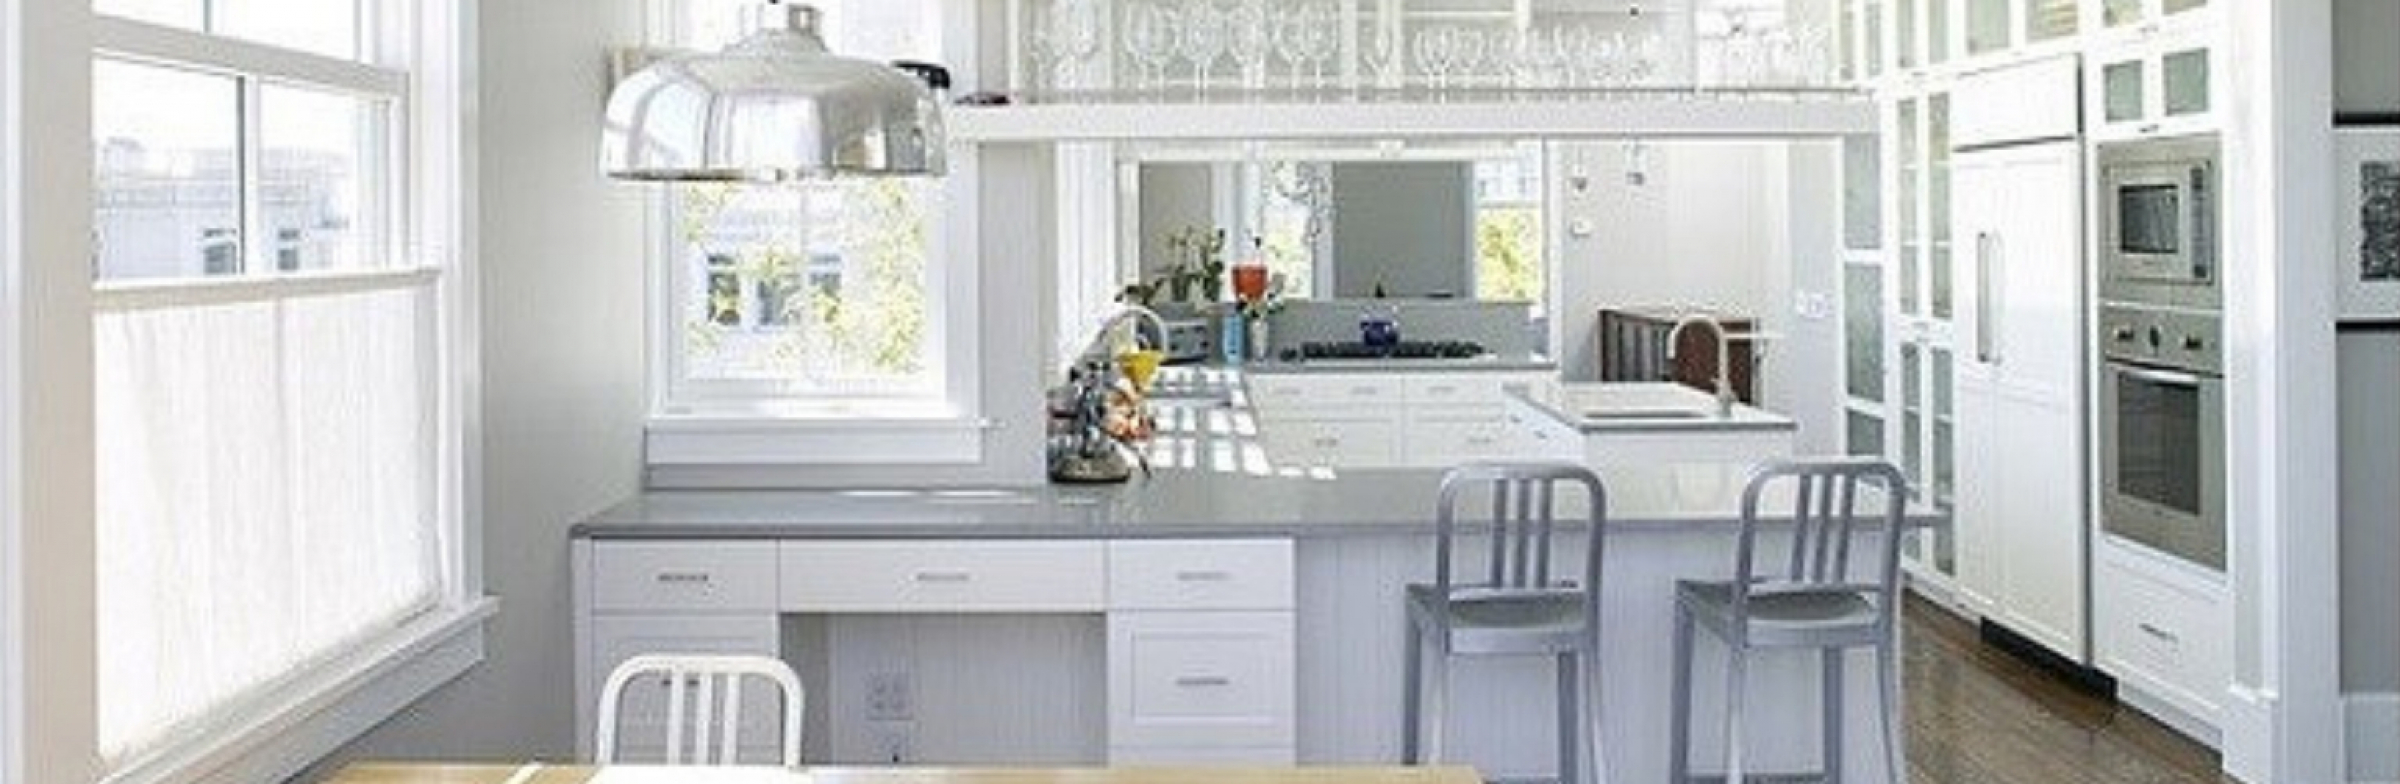 The Open Concept Kitchen: Does It Fit Your Lifestyle